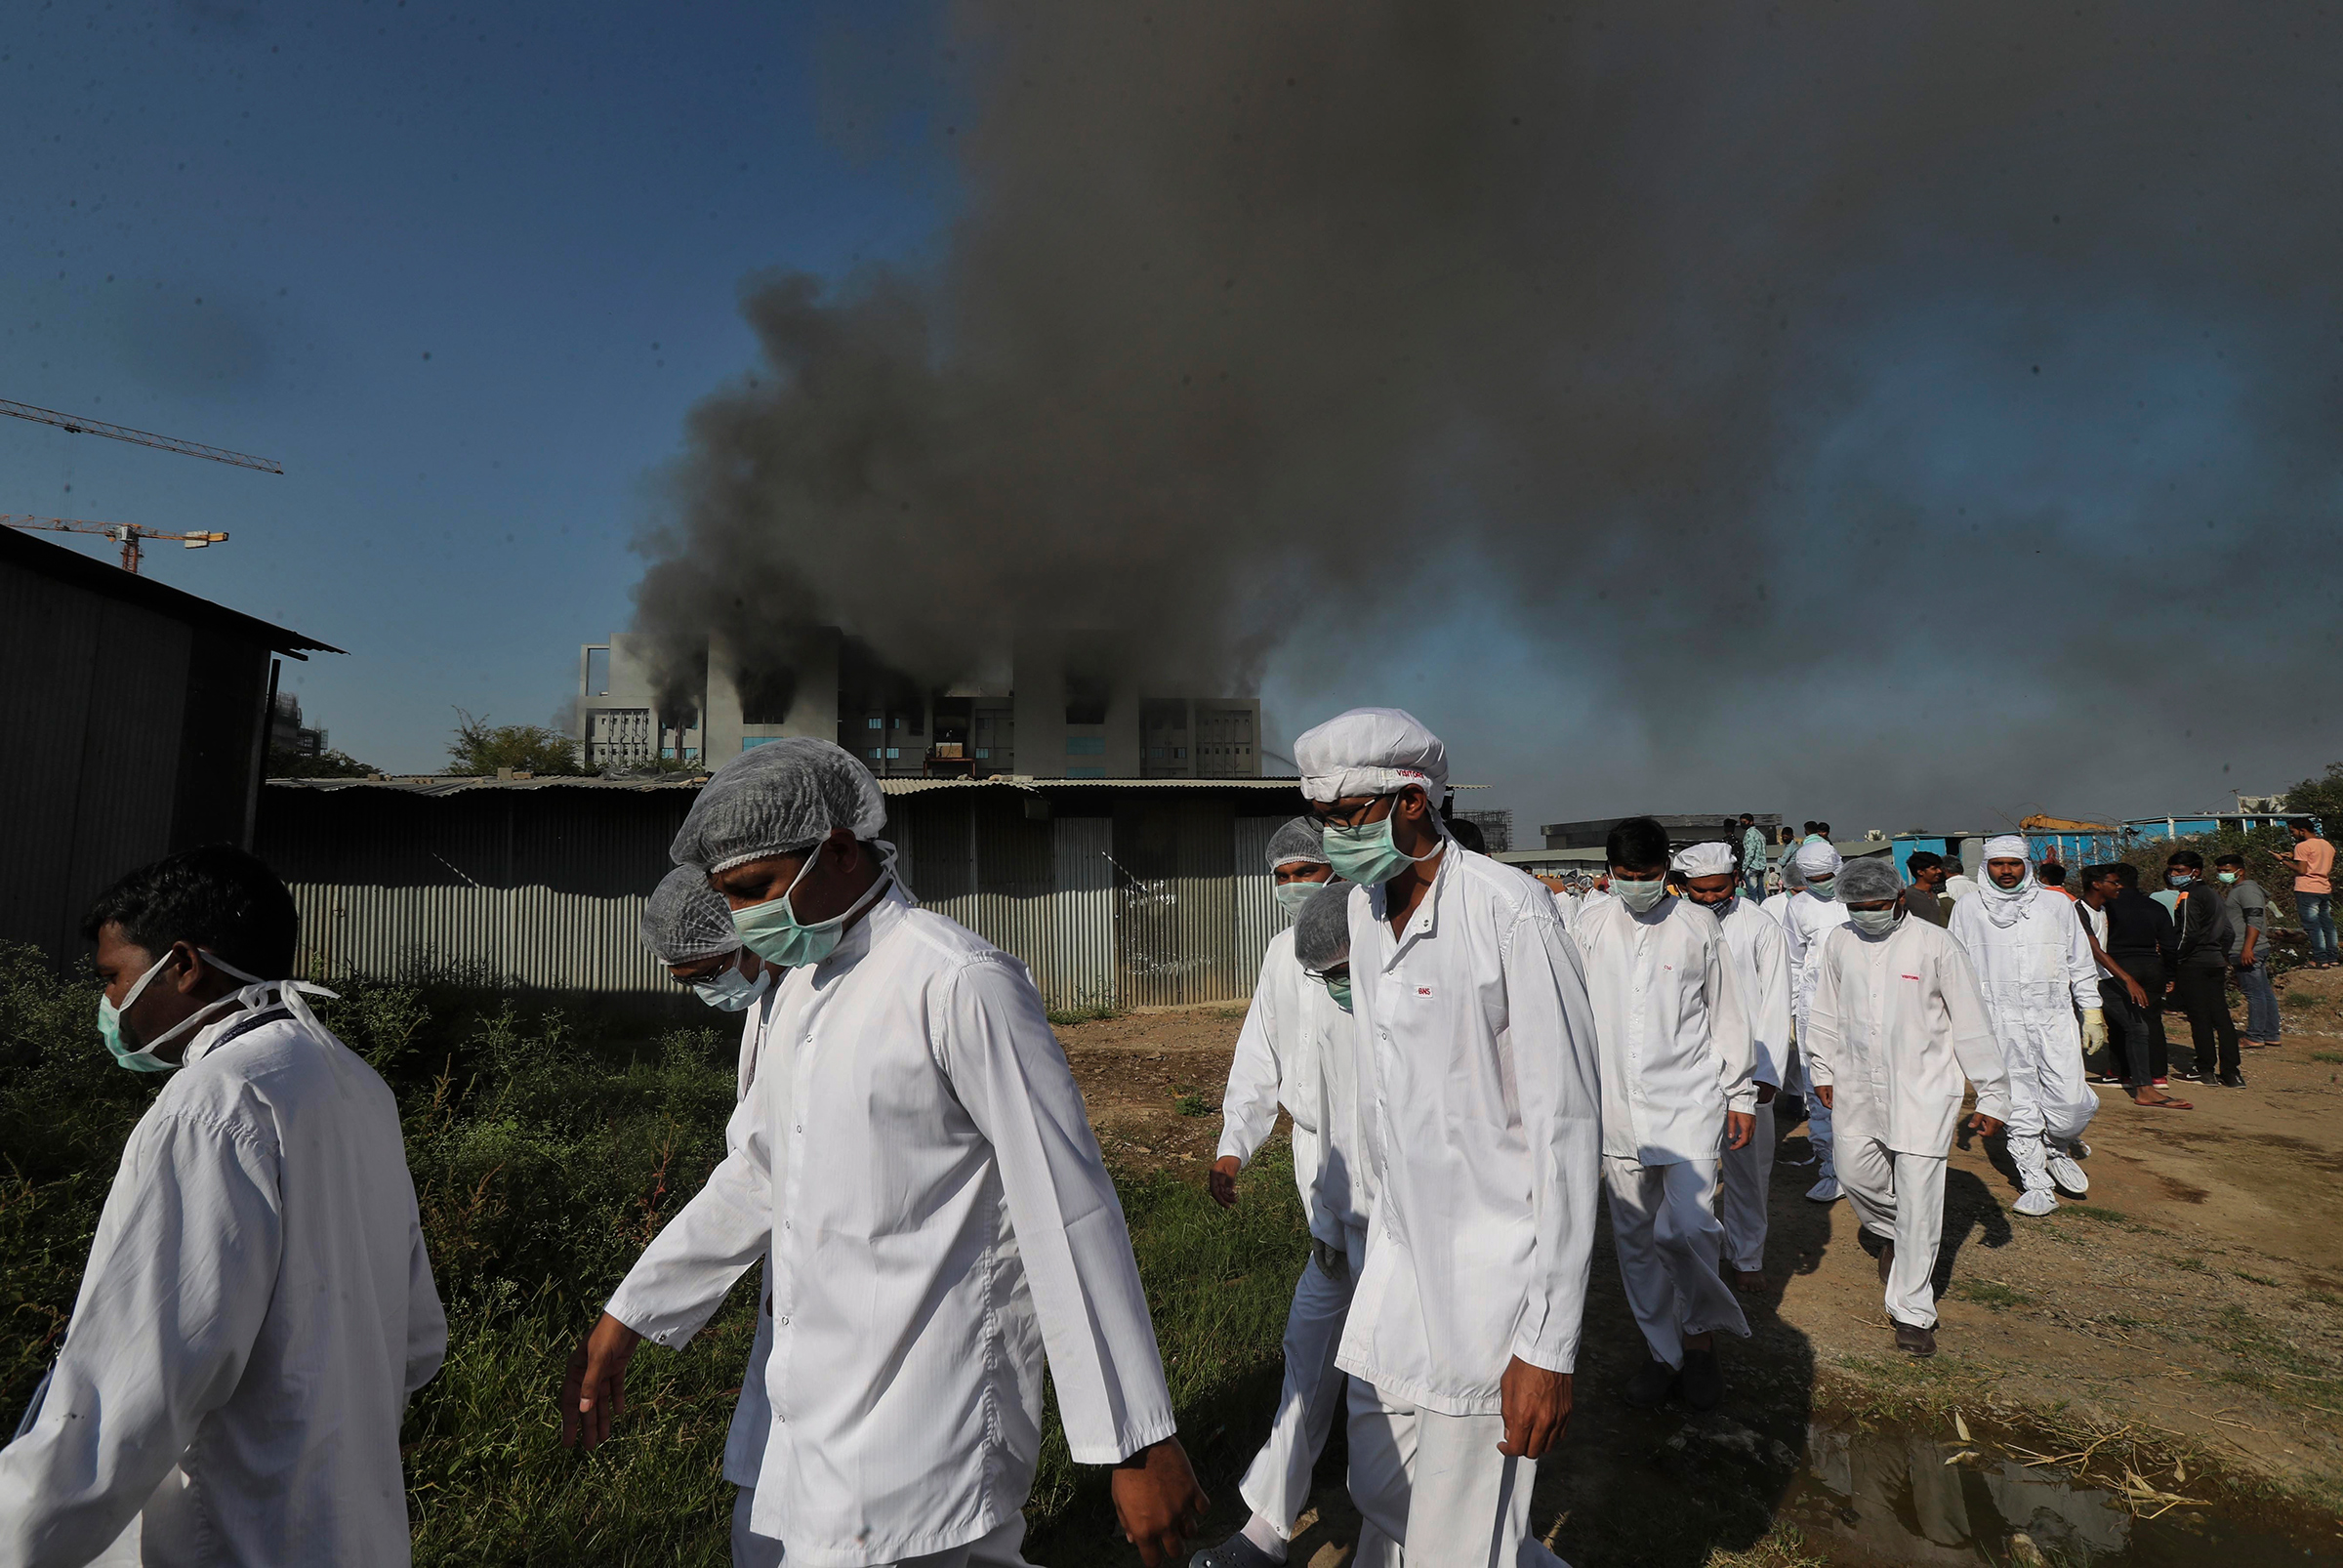 Employees leave as smoke rises from a fire at Serum Institute of India, Pune, in January 2021 (Rafiq Maqbool—AP)